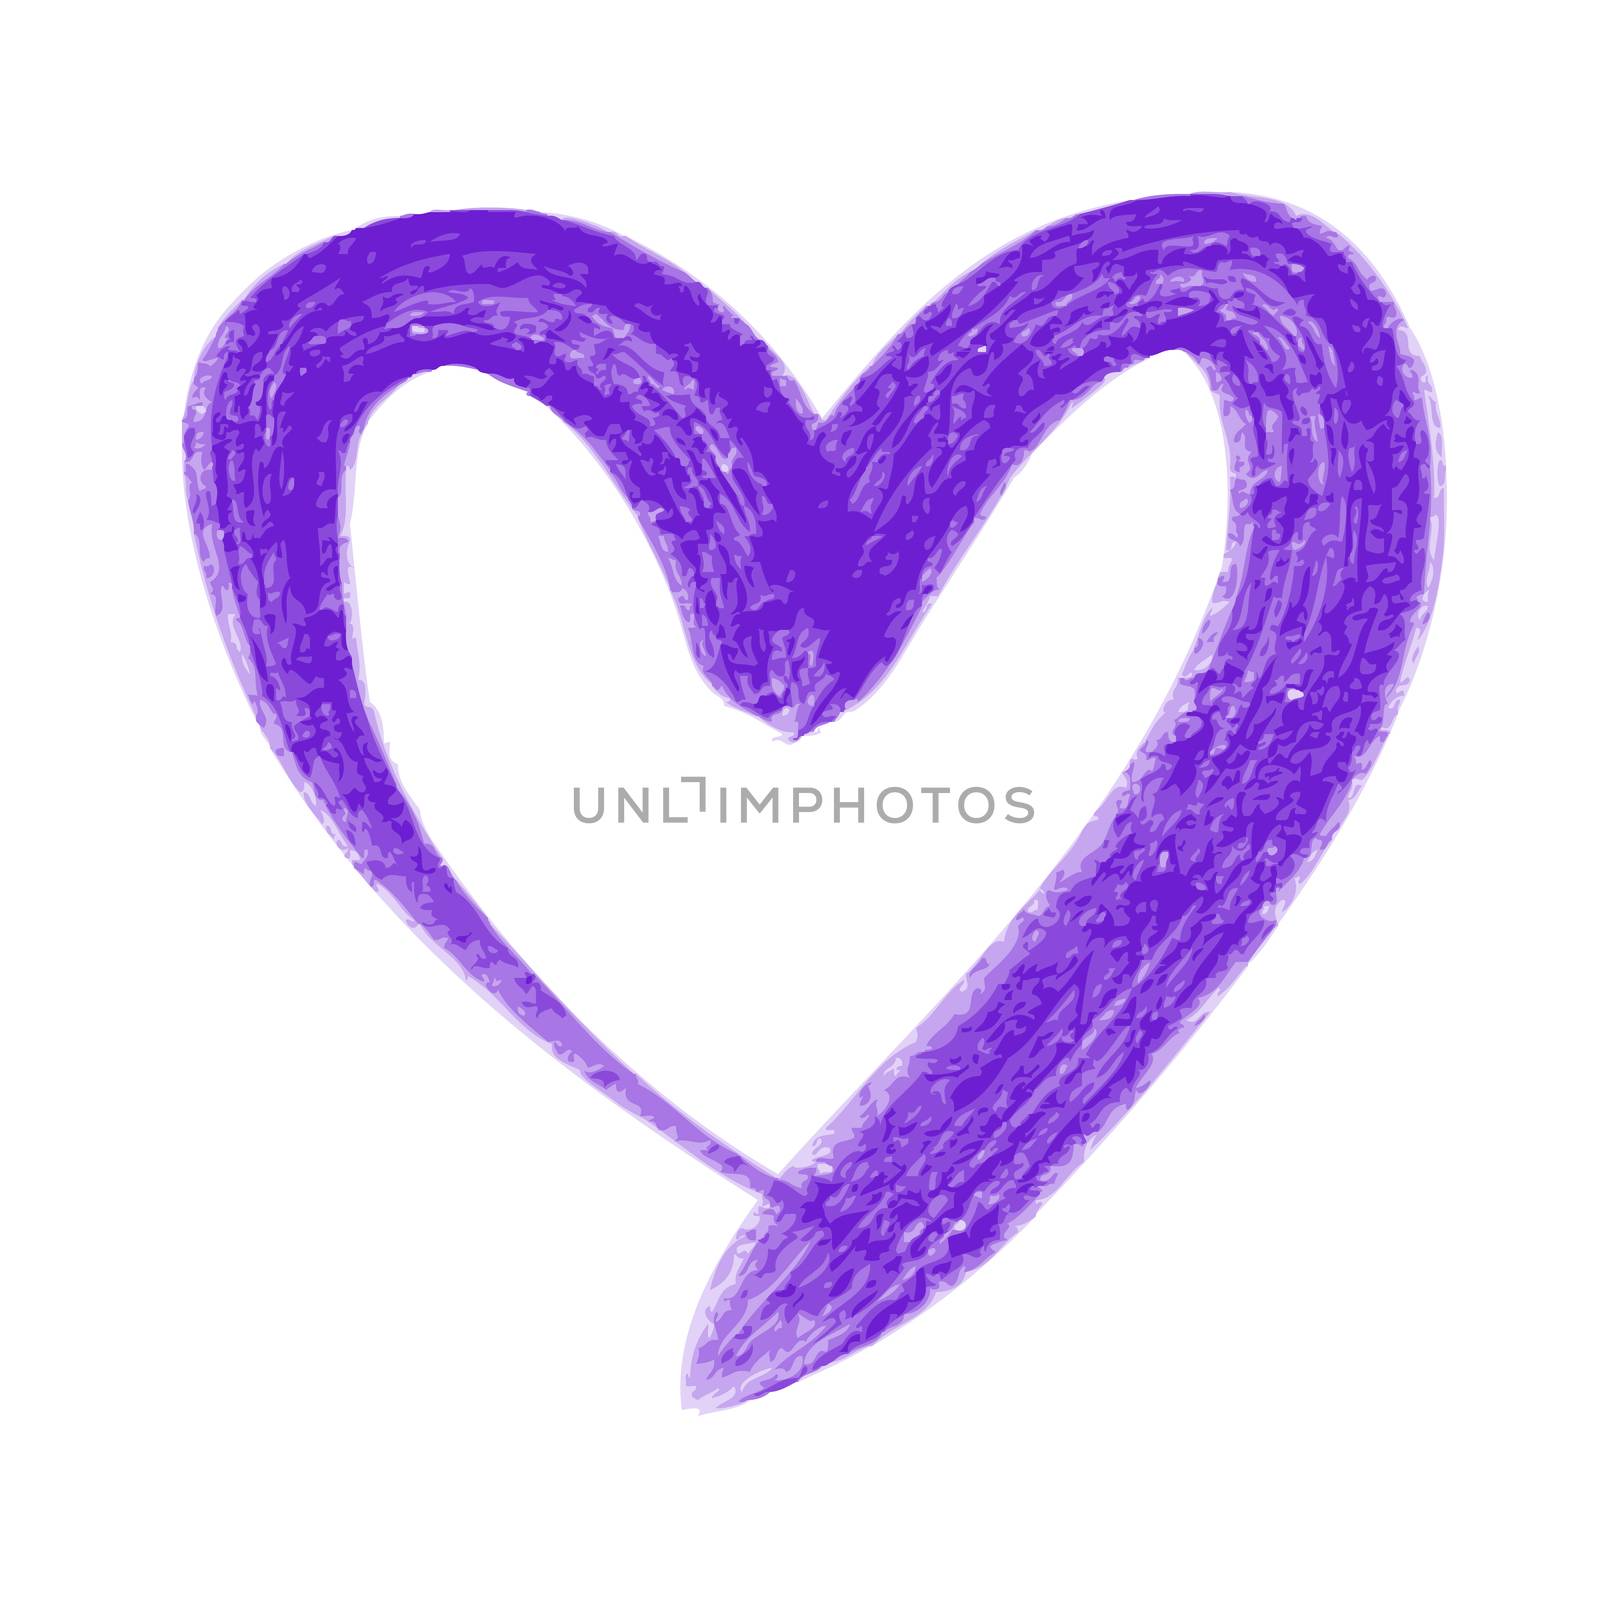 doodle hand drawn violet heart shaped on white background